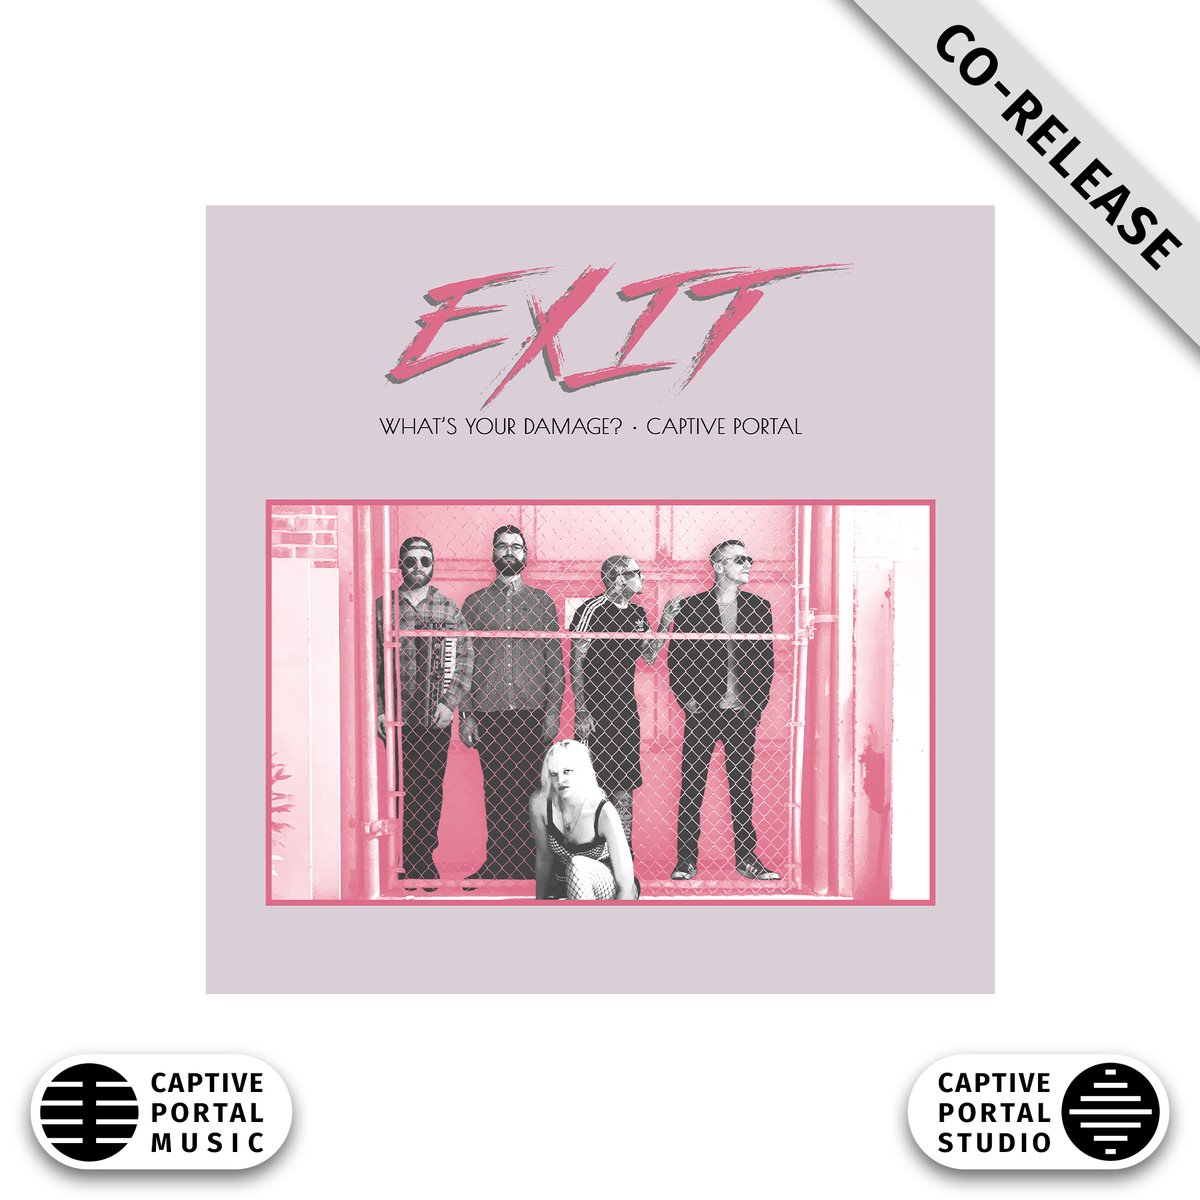 🎶 Happy release day to the song 'Exit,' a collaboration remake with What's Your Damage? Streaming Link: songwhip.com/whatsyourdamag…